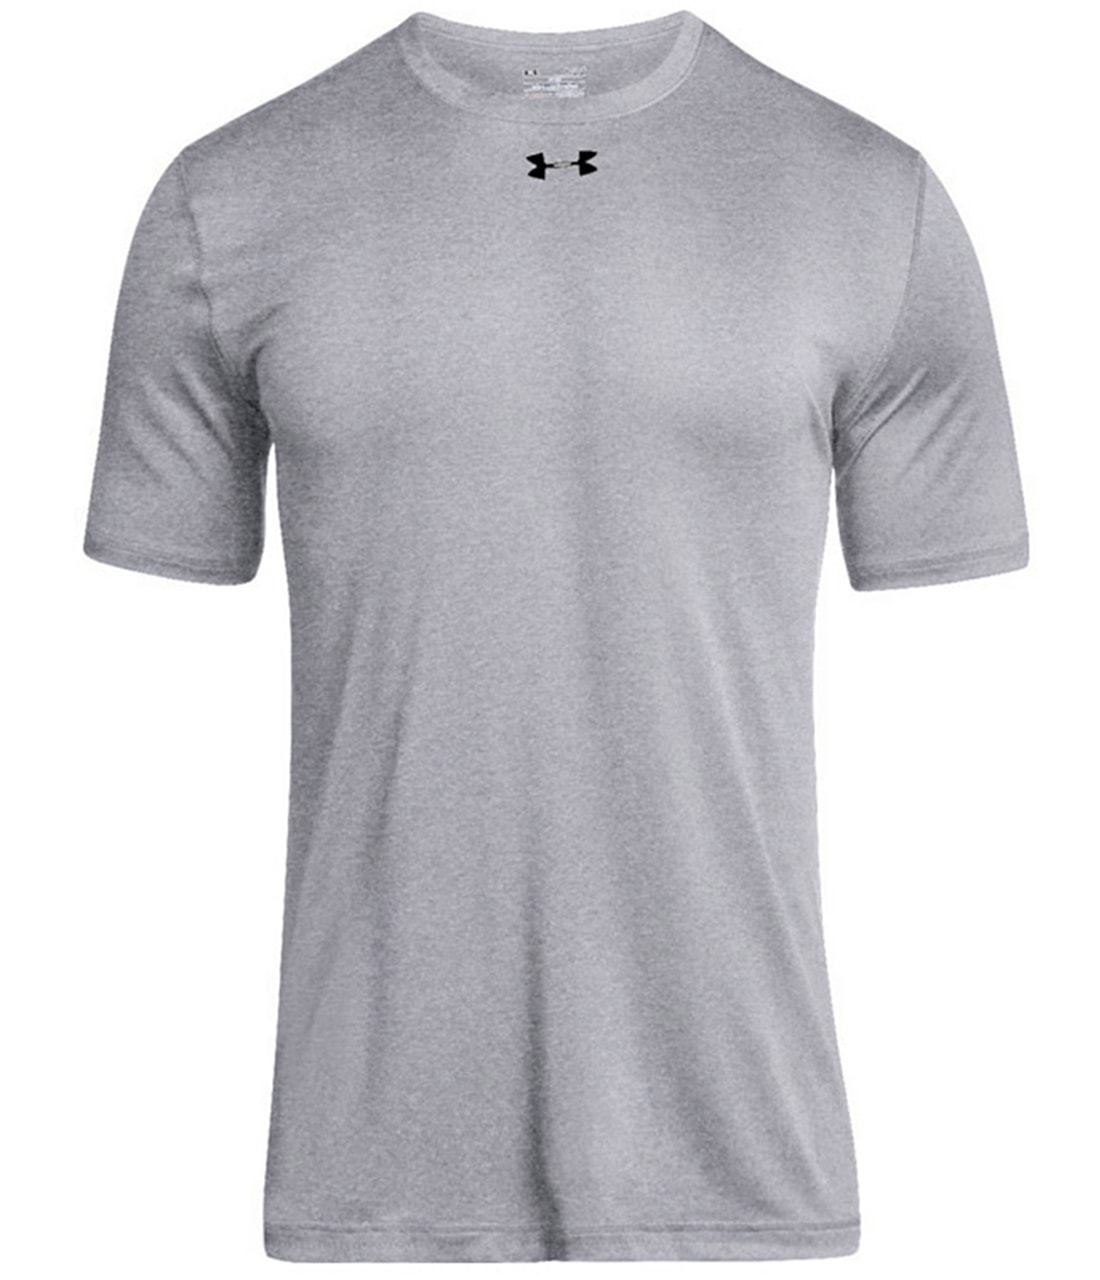 under armour printed shirts